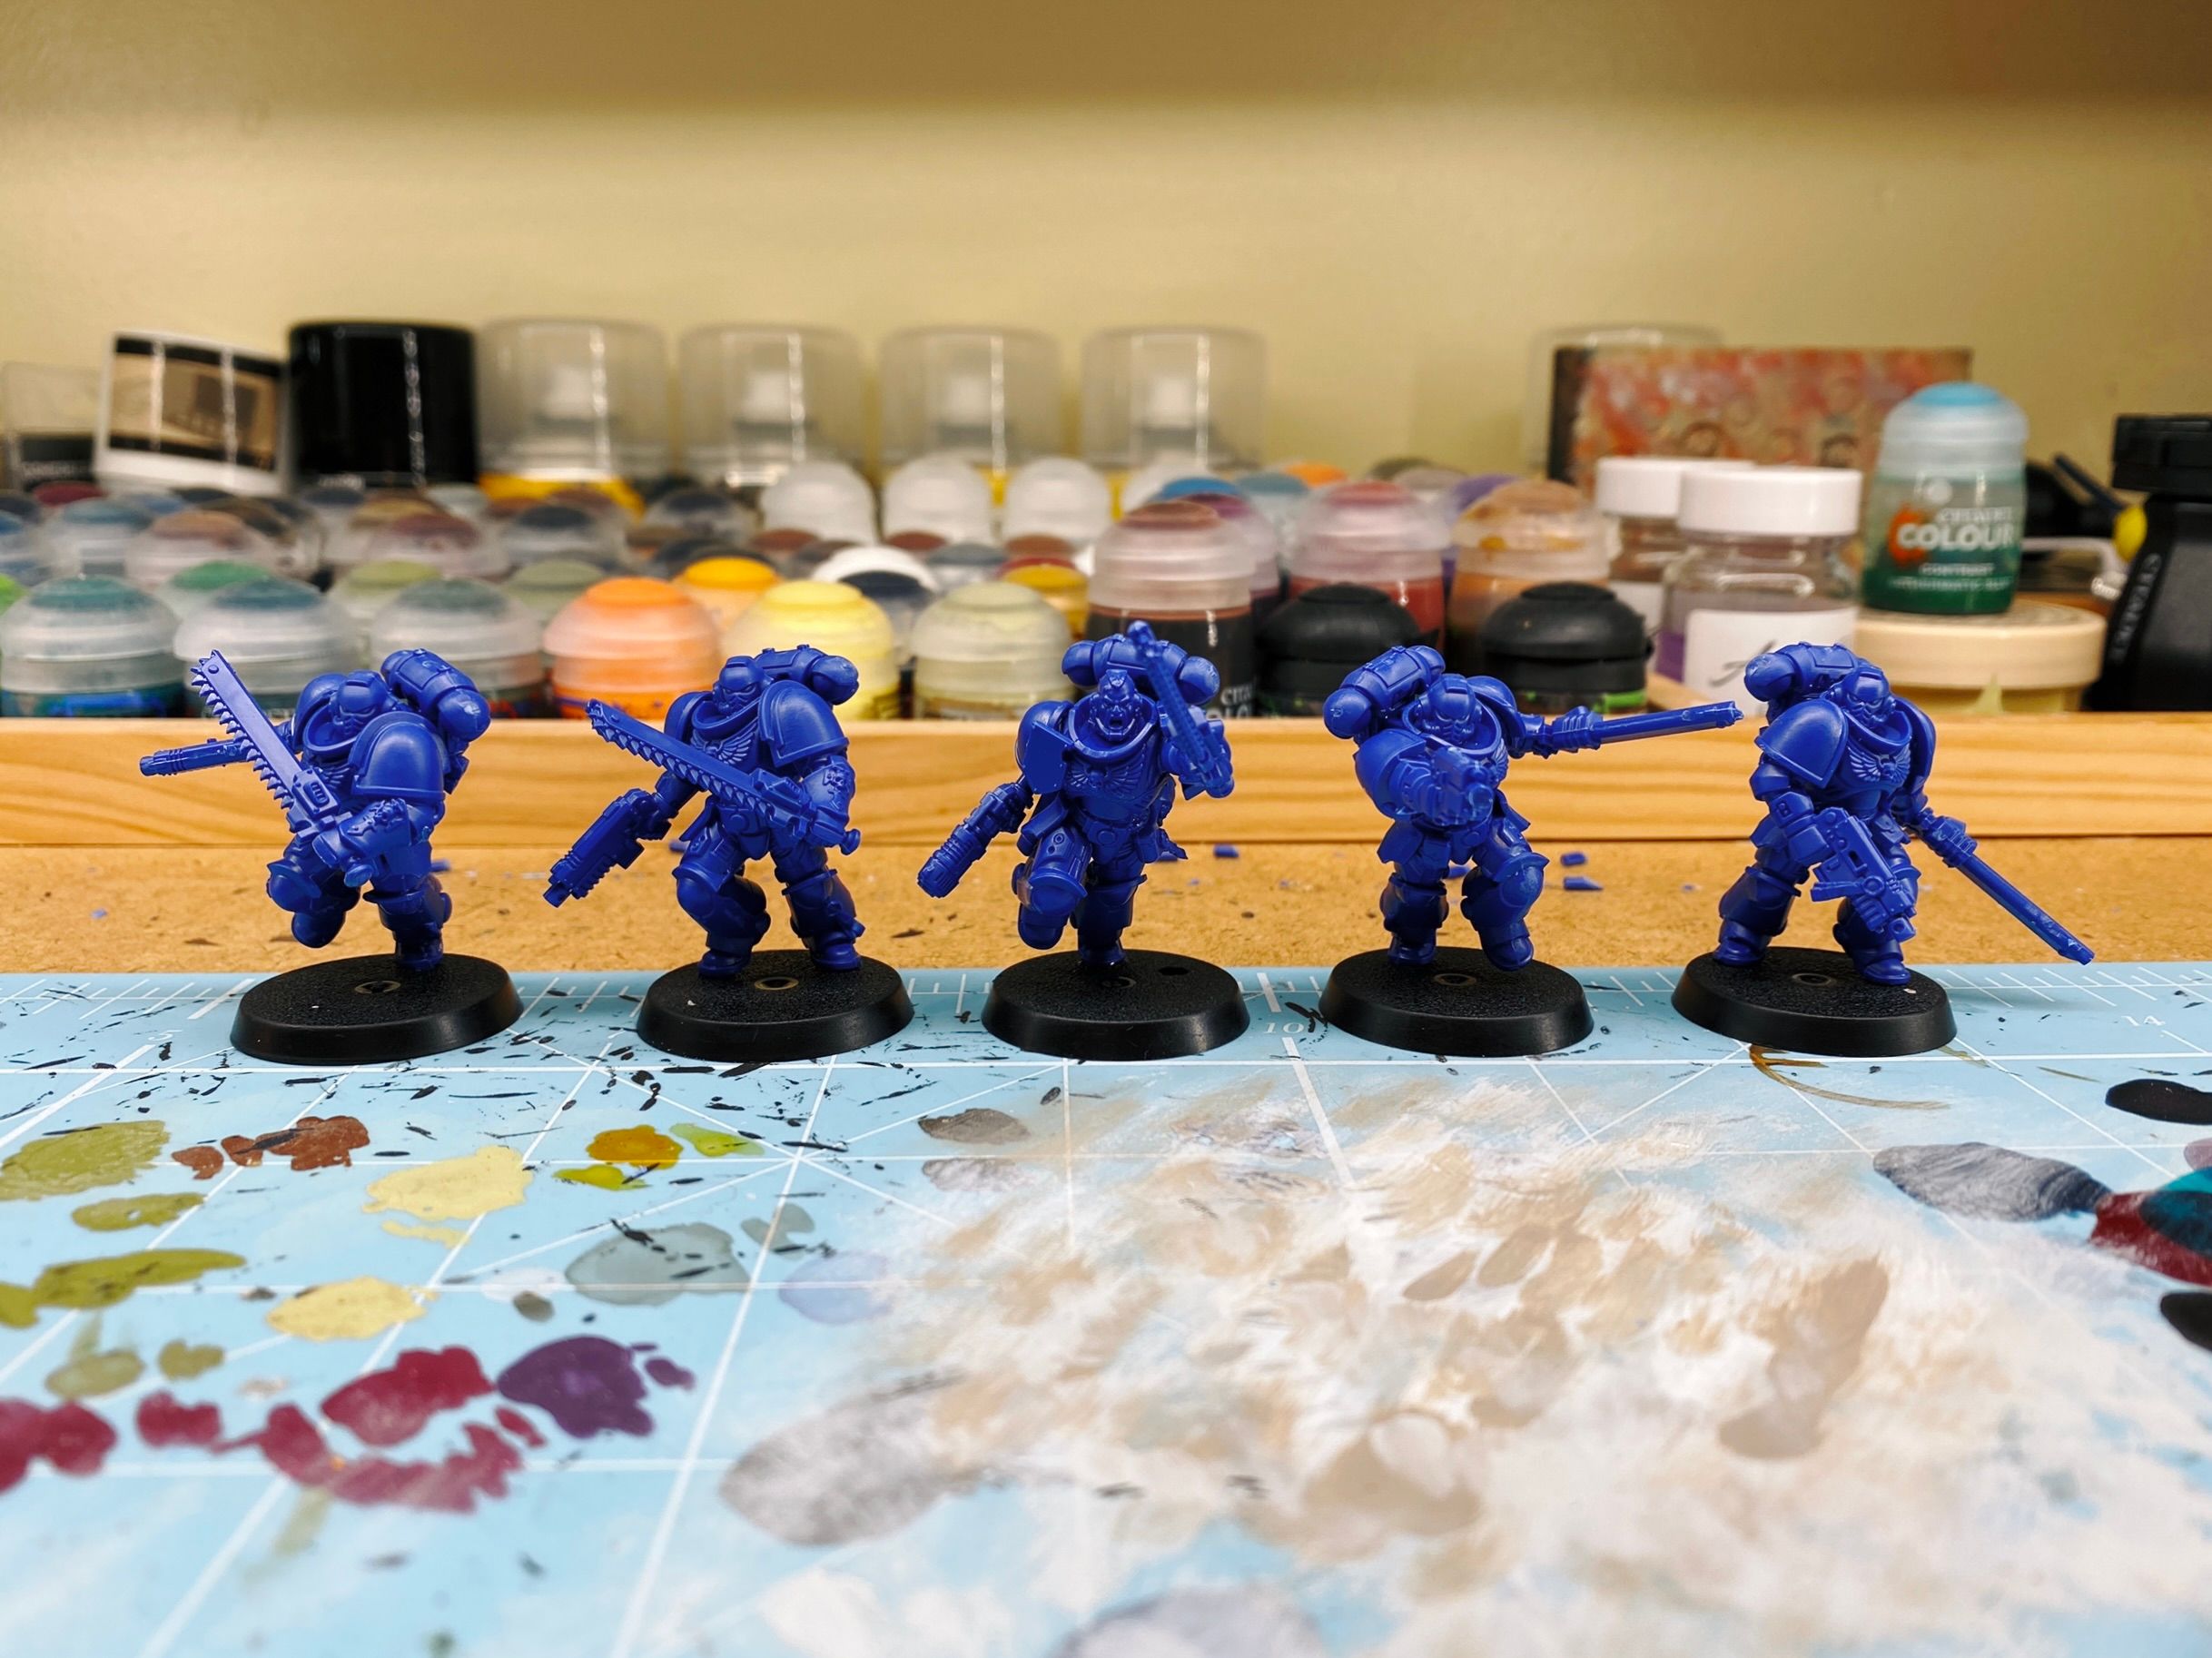 A photo of five Space Marines in bare blue plastic. They're all equipped with chainswords and pistols, and are in various dynamic poses.